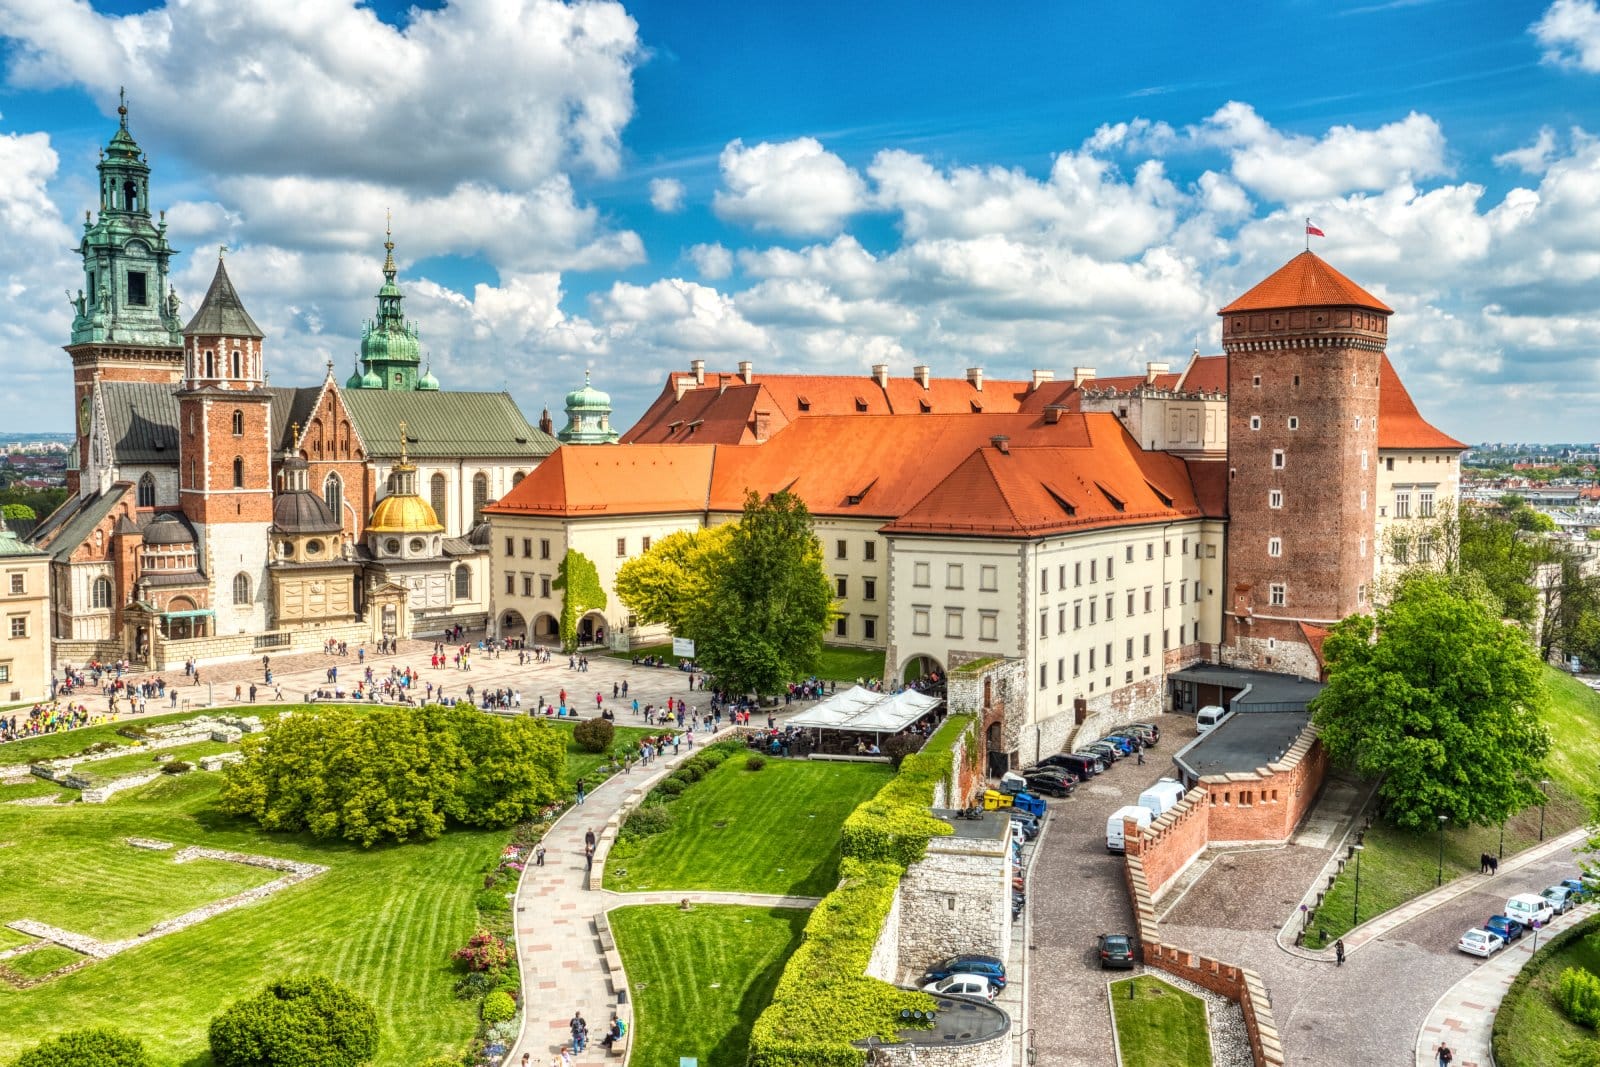 <p class="wp-caption-text">Image Credit: Shutterstock / RomanSlavik.com</p>  <p>Kraków offers a perfect blend of history, culture, and affordability, with its inexpensive accommodations, food, and attractions like the Wawel Castle.</p>